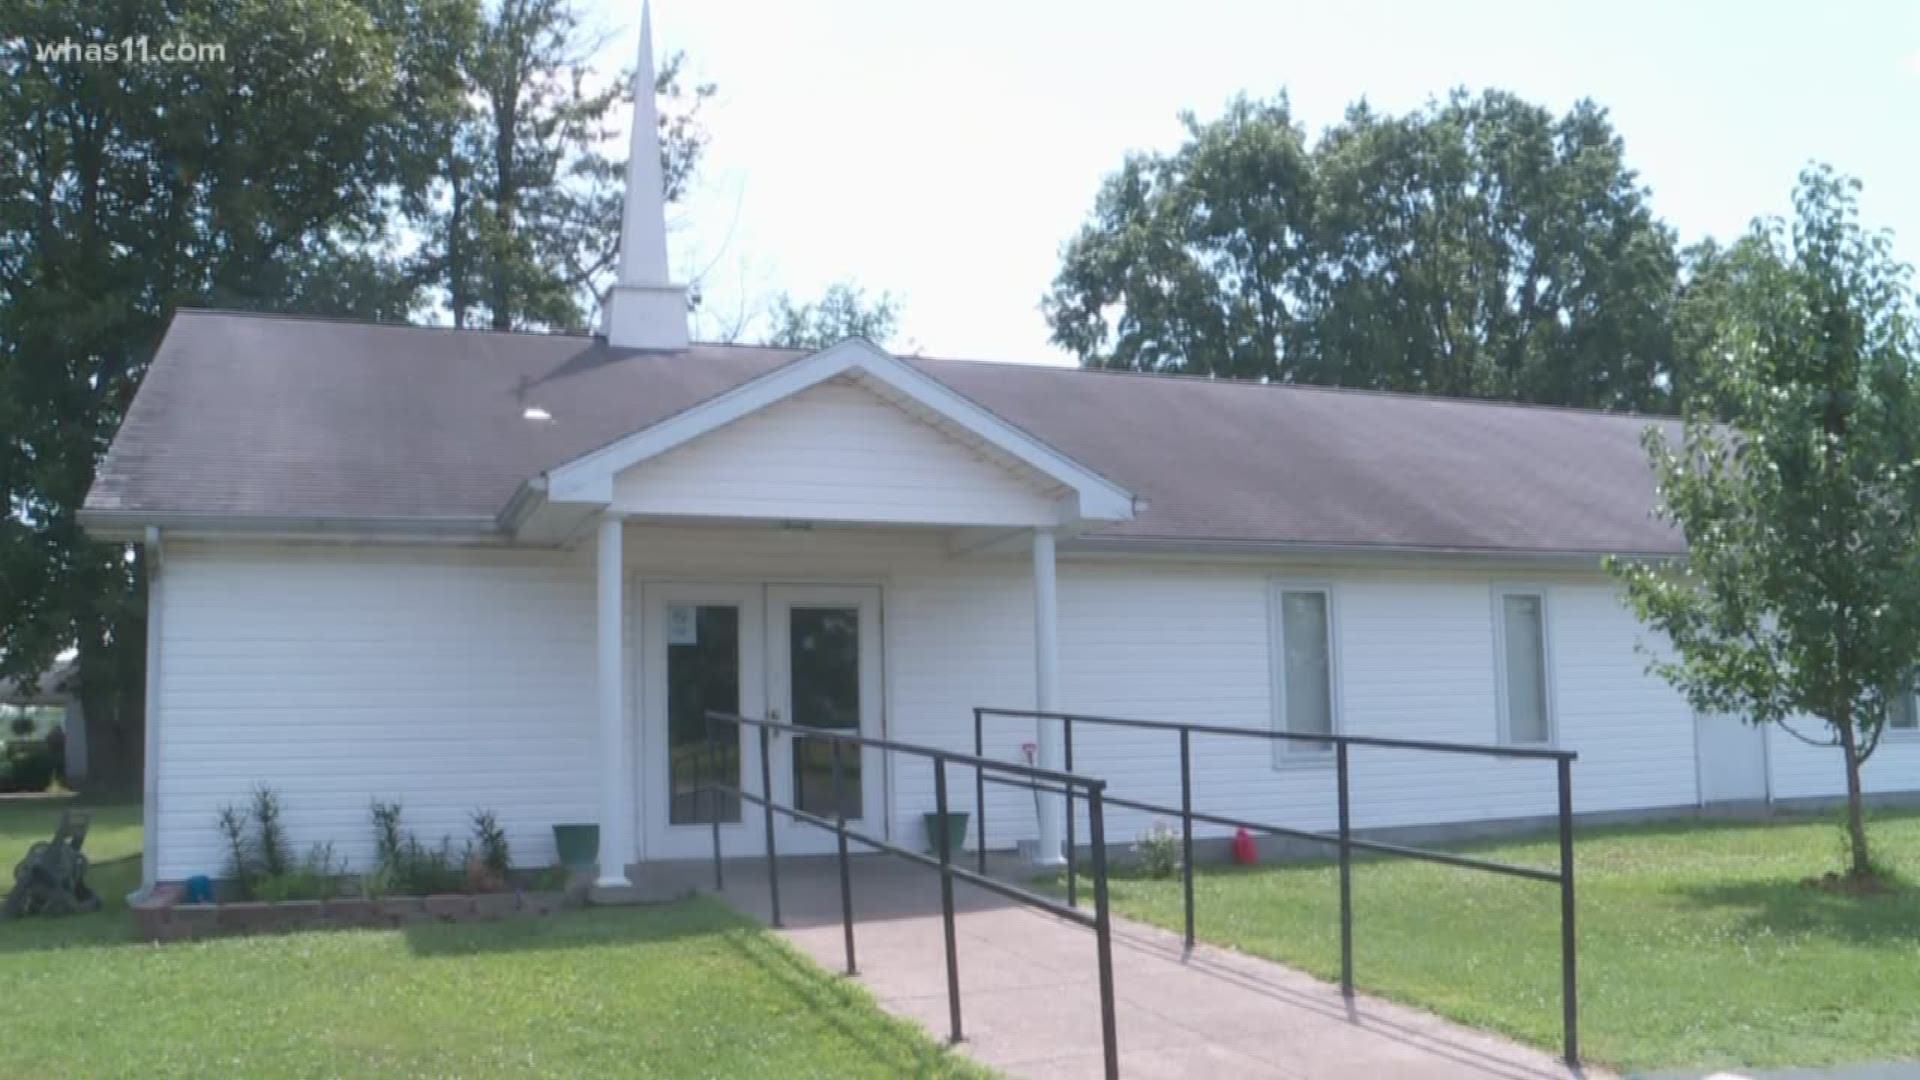 A group of homeless people could soon be forced out of a church in Scottsburg, Indiana that opened its doors to them in January.